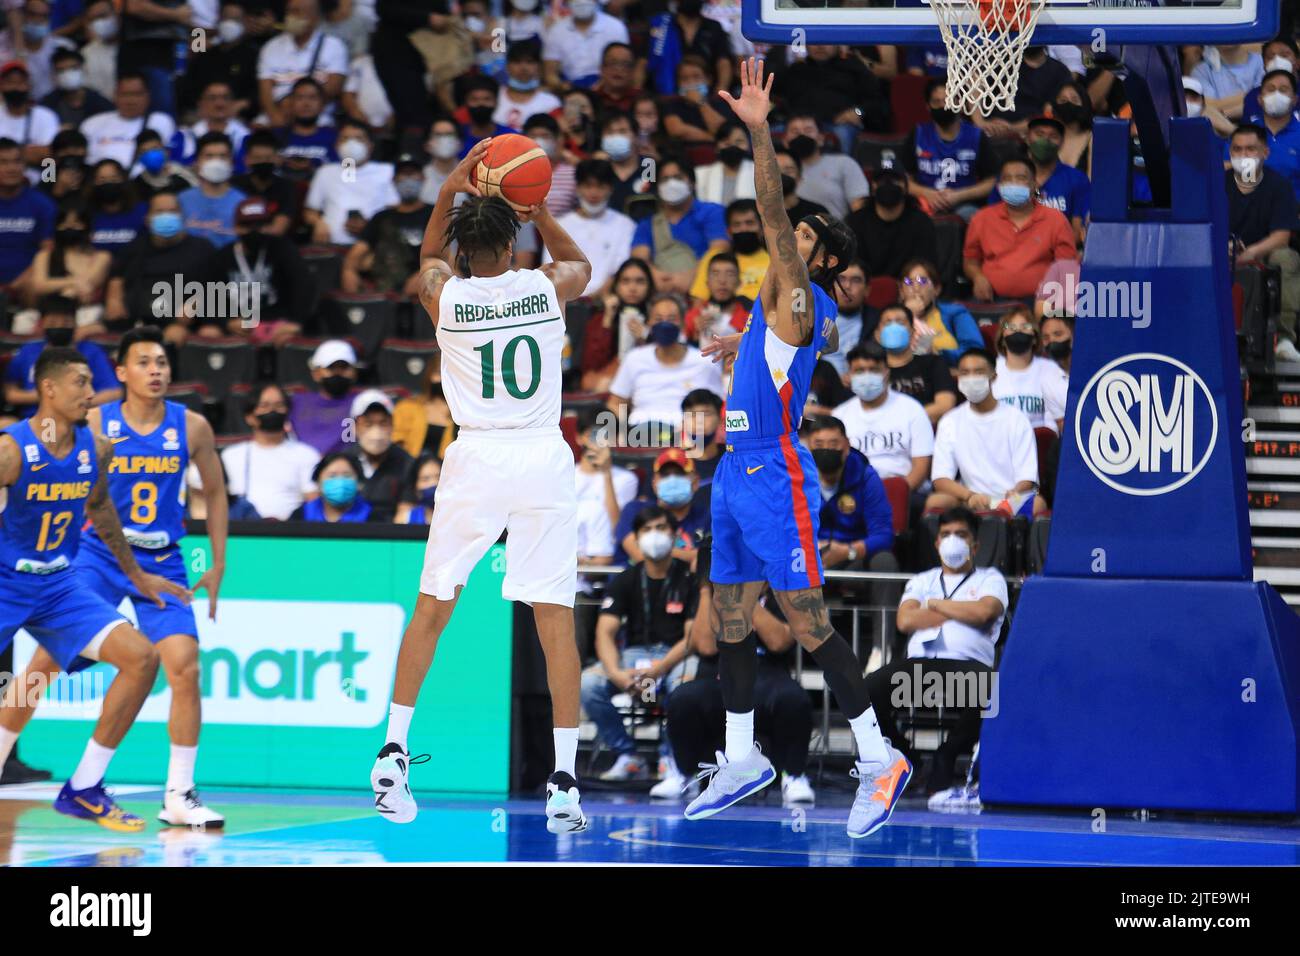 Pasay City, Philippines. 29th Aug, 2022. Khalid M Abdel Gabar (White, 10) tries to shoot over Jordan Clarkson (6, Blue) during the basketball game between the Philippines and Saudi Arabia. (Photo by Dennis Jerome Acosta/Pacific Press) Credit: Pacific Press Media Production Corp./Alamy Live News Stock Photo